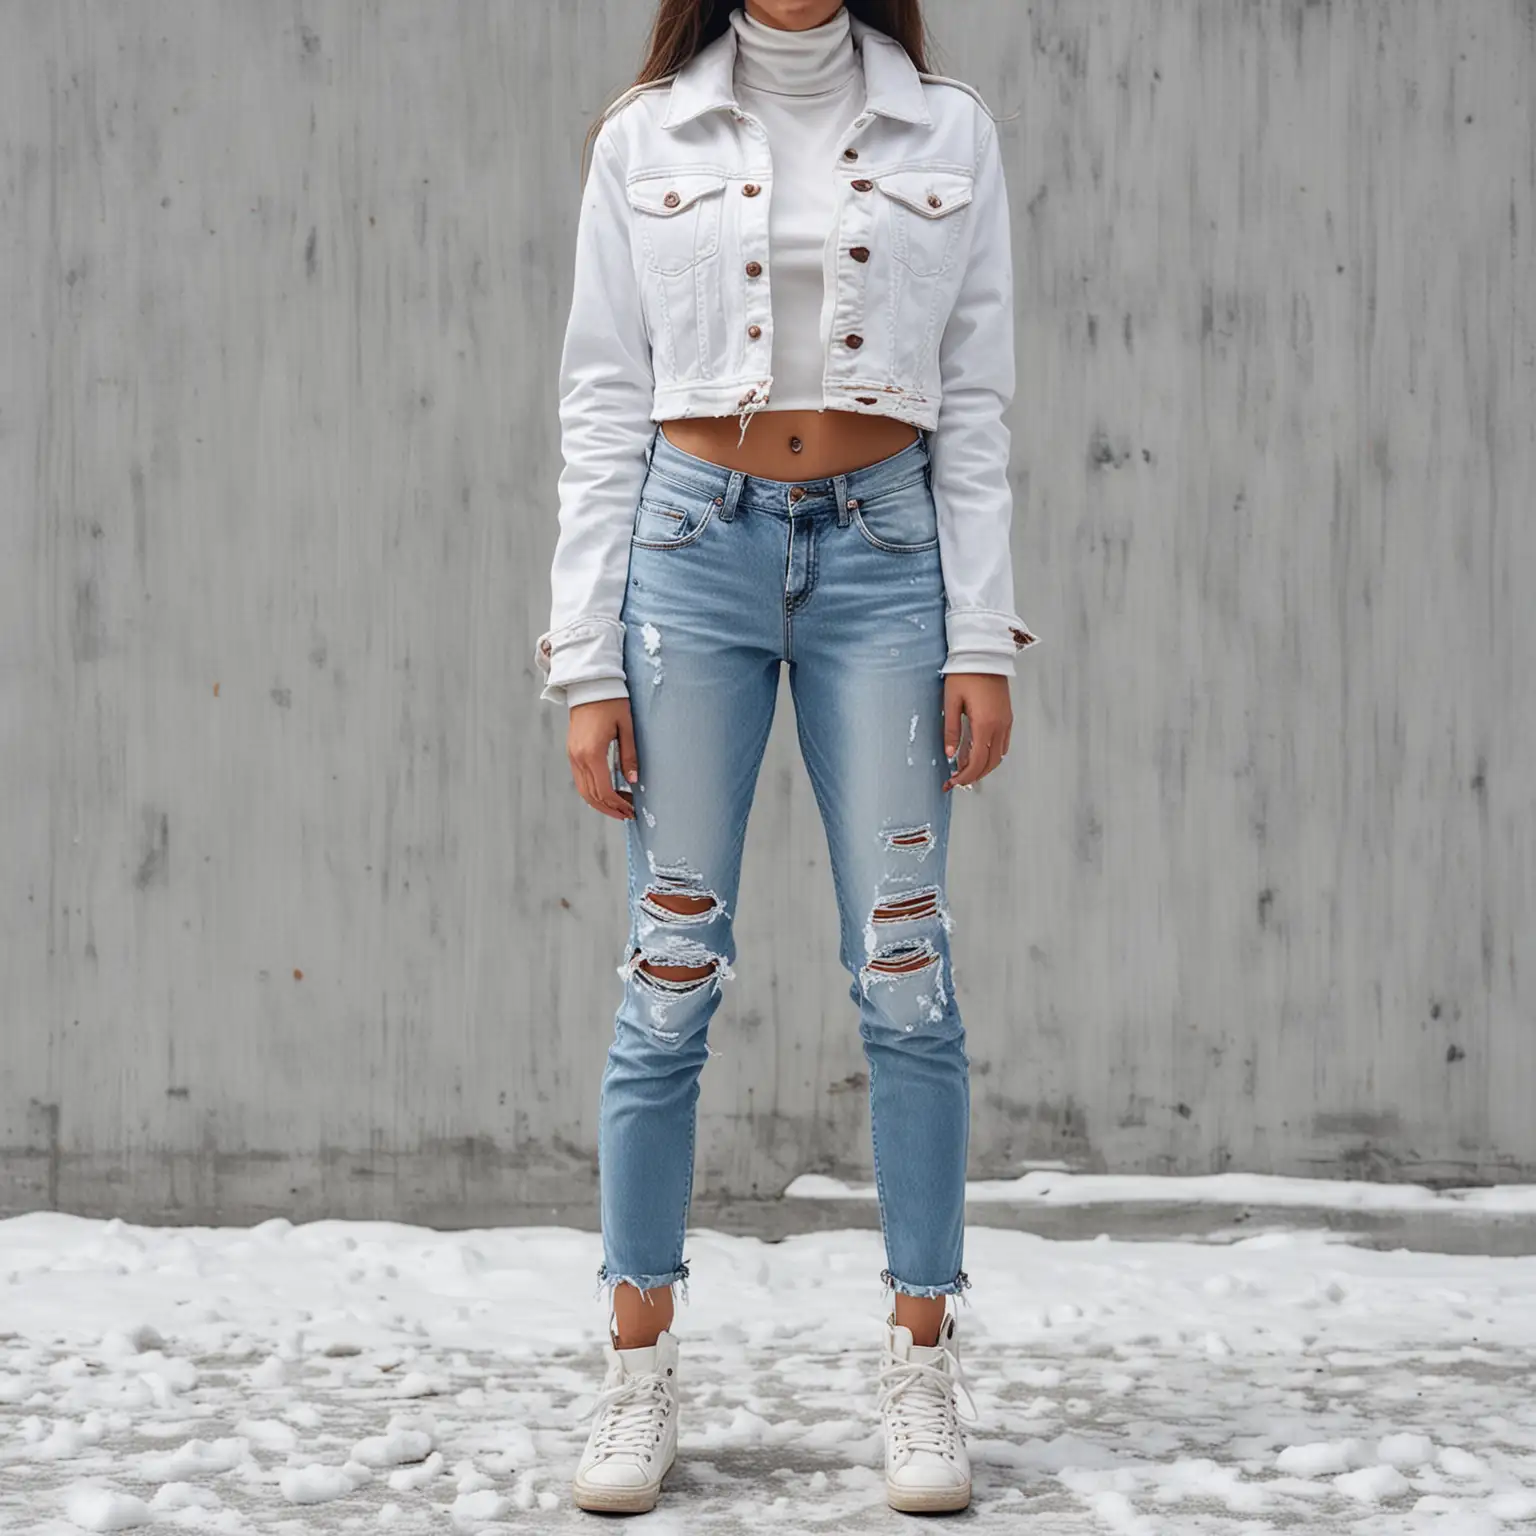 women wearing white jacket and denim jeans, with ripping on front of the jeans, snow background